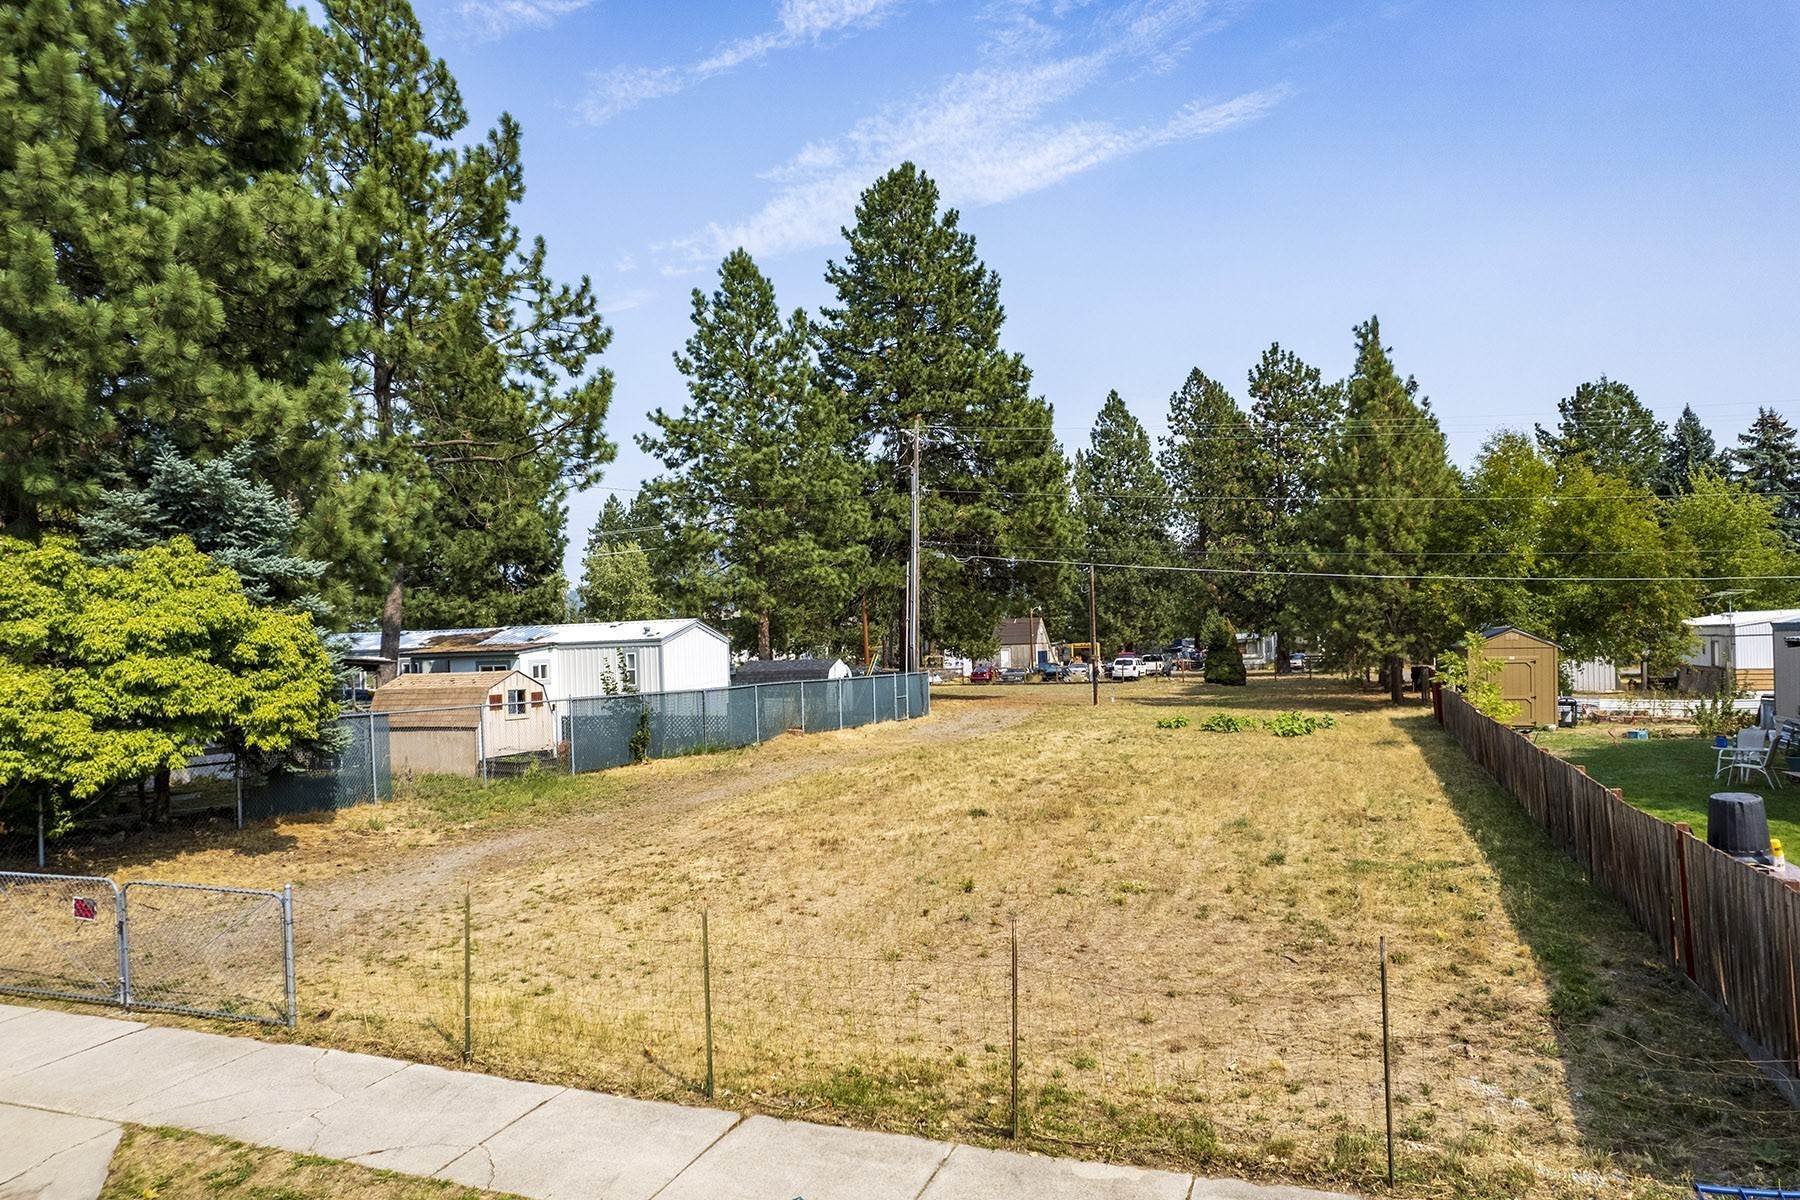 11. Land for Sale at Mid Town Vacant Lot 3102 N Francis St Coeur d’Alene, Idaho 83815 United States